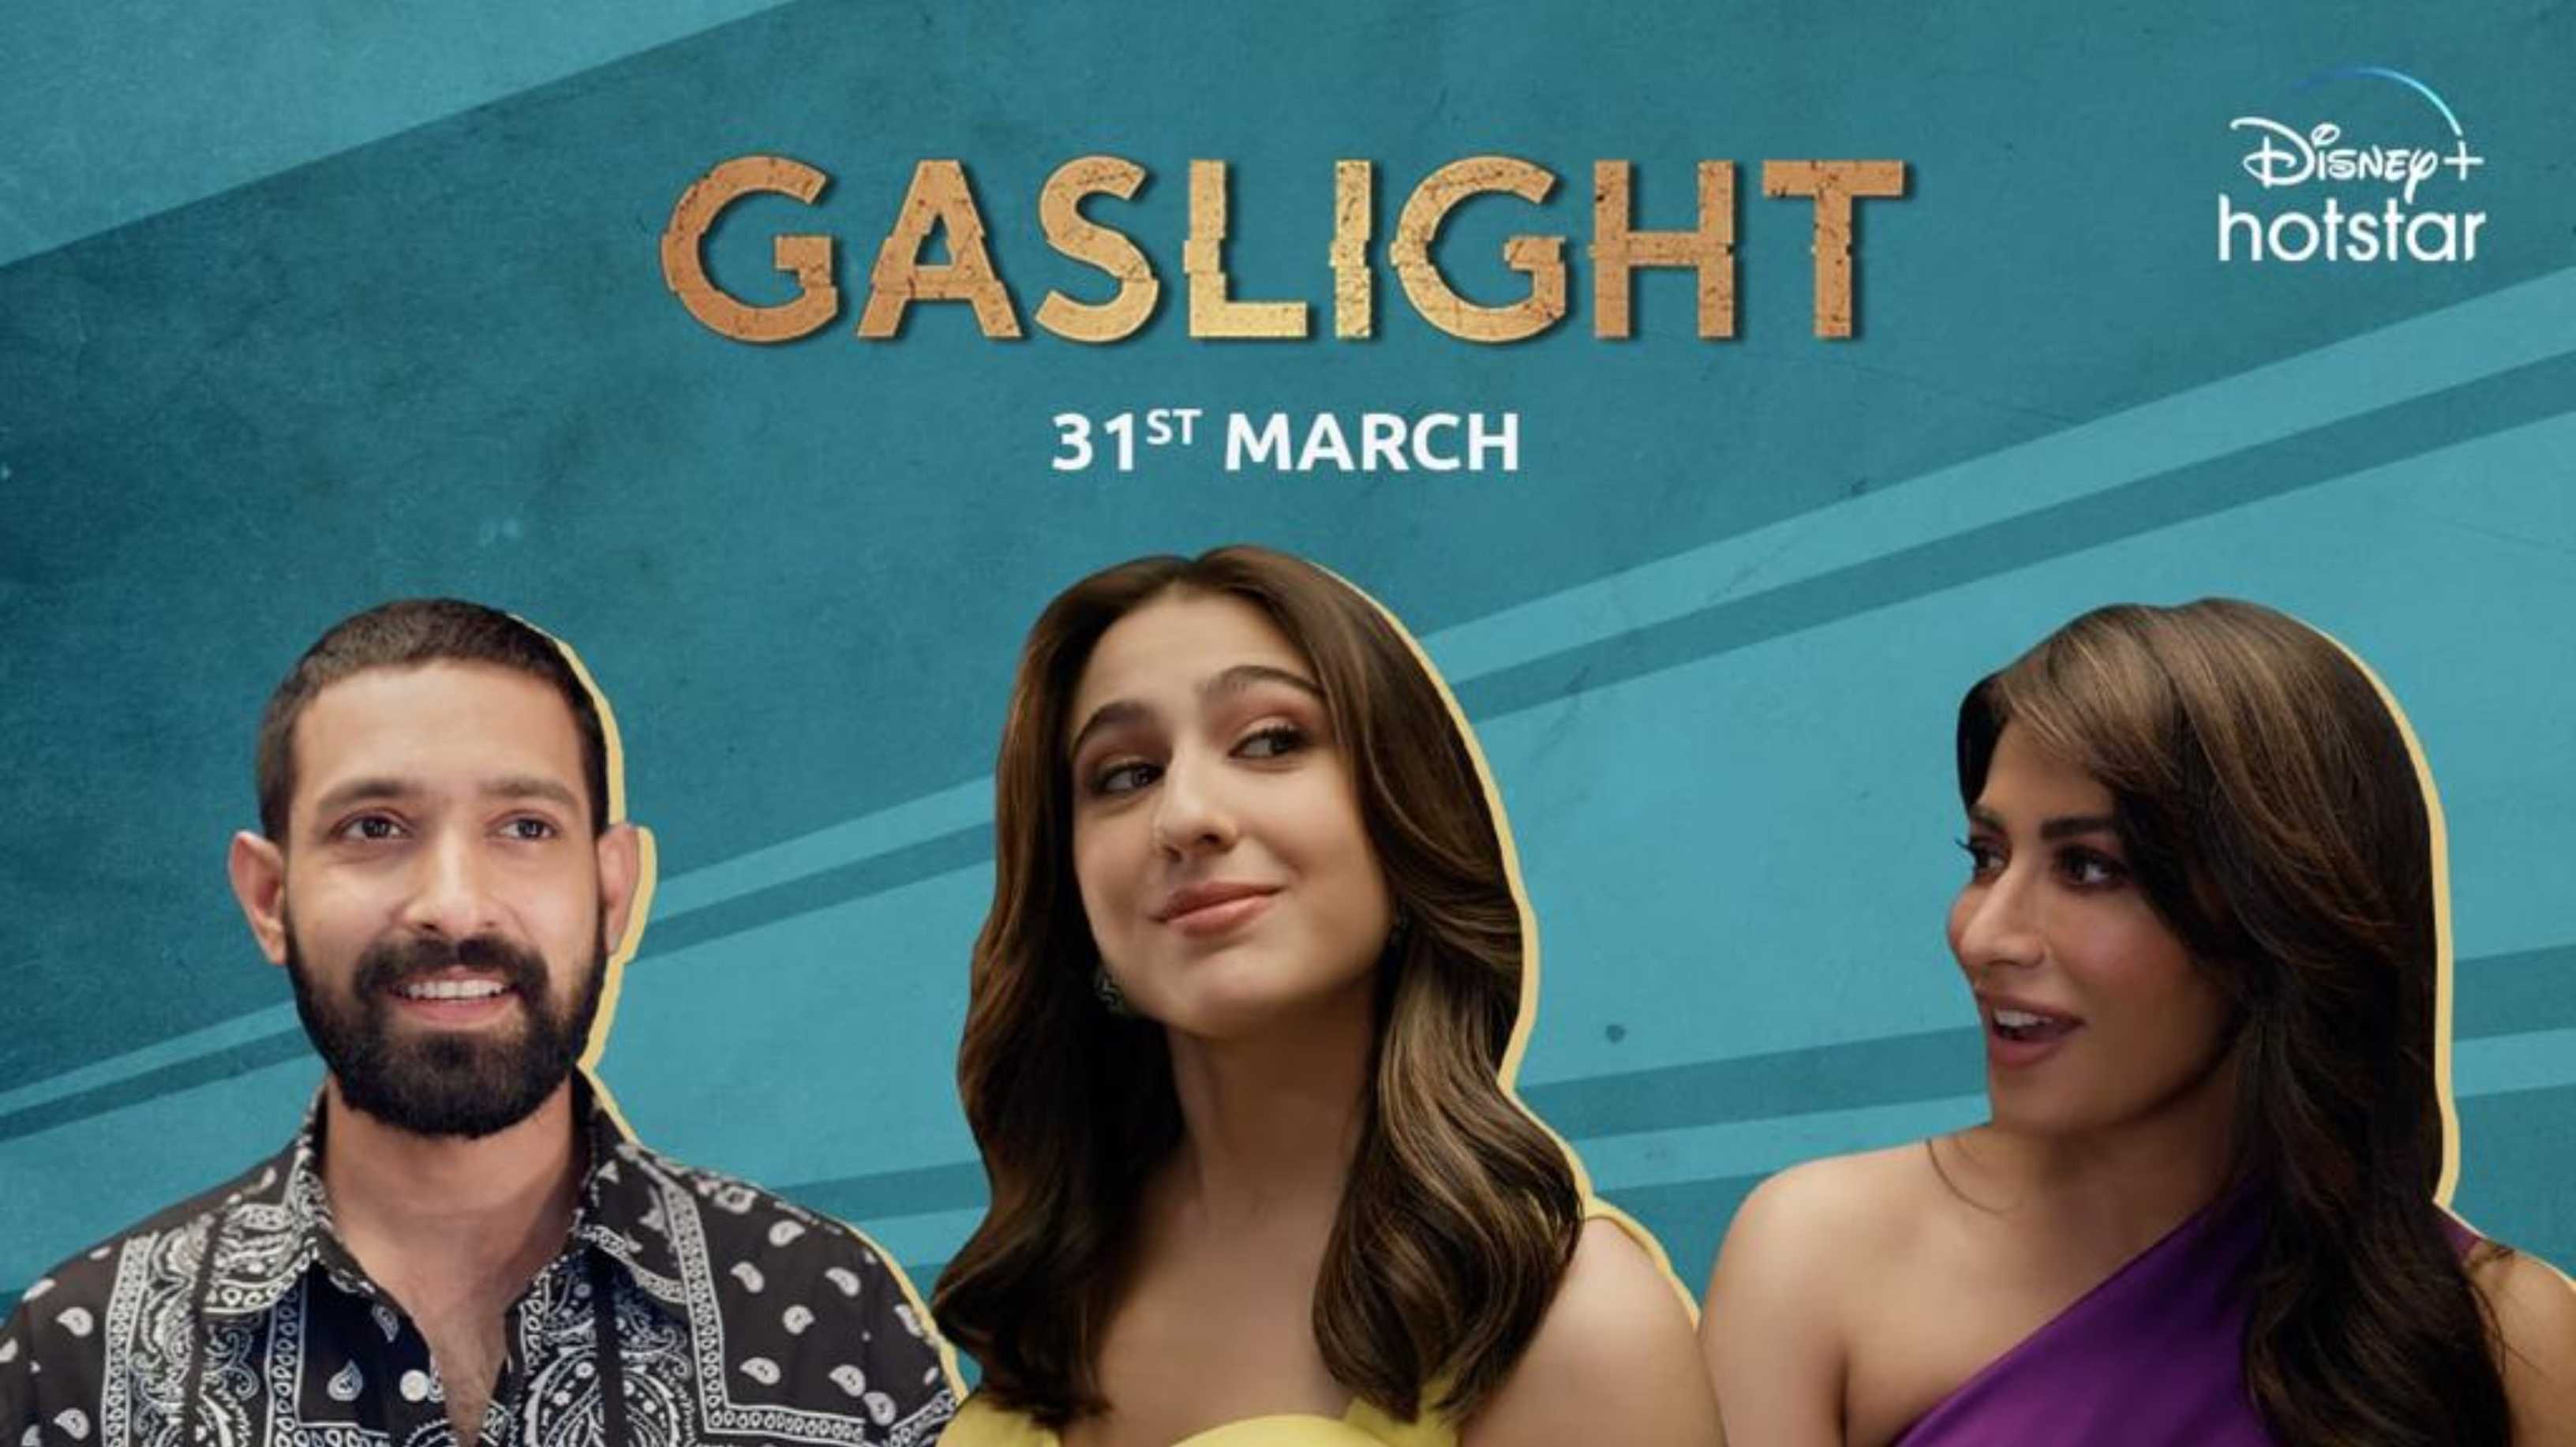 Gaslight: Sara Ali Khan, Vikrant Massey and Chitrangda Singh come together for an interesting announcement video